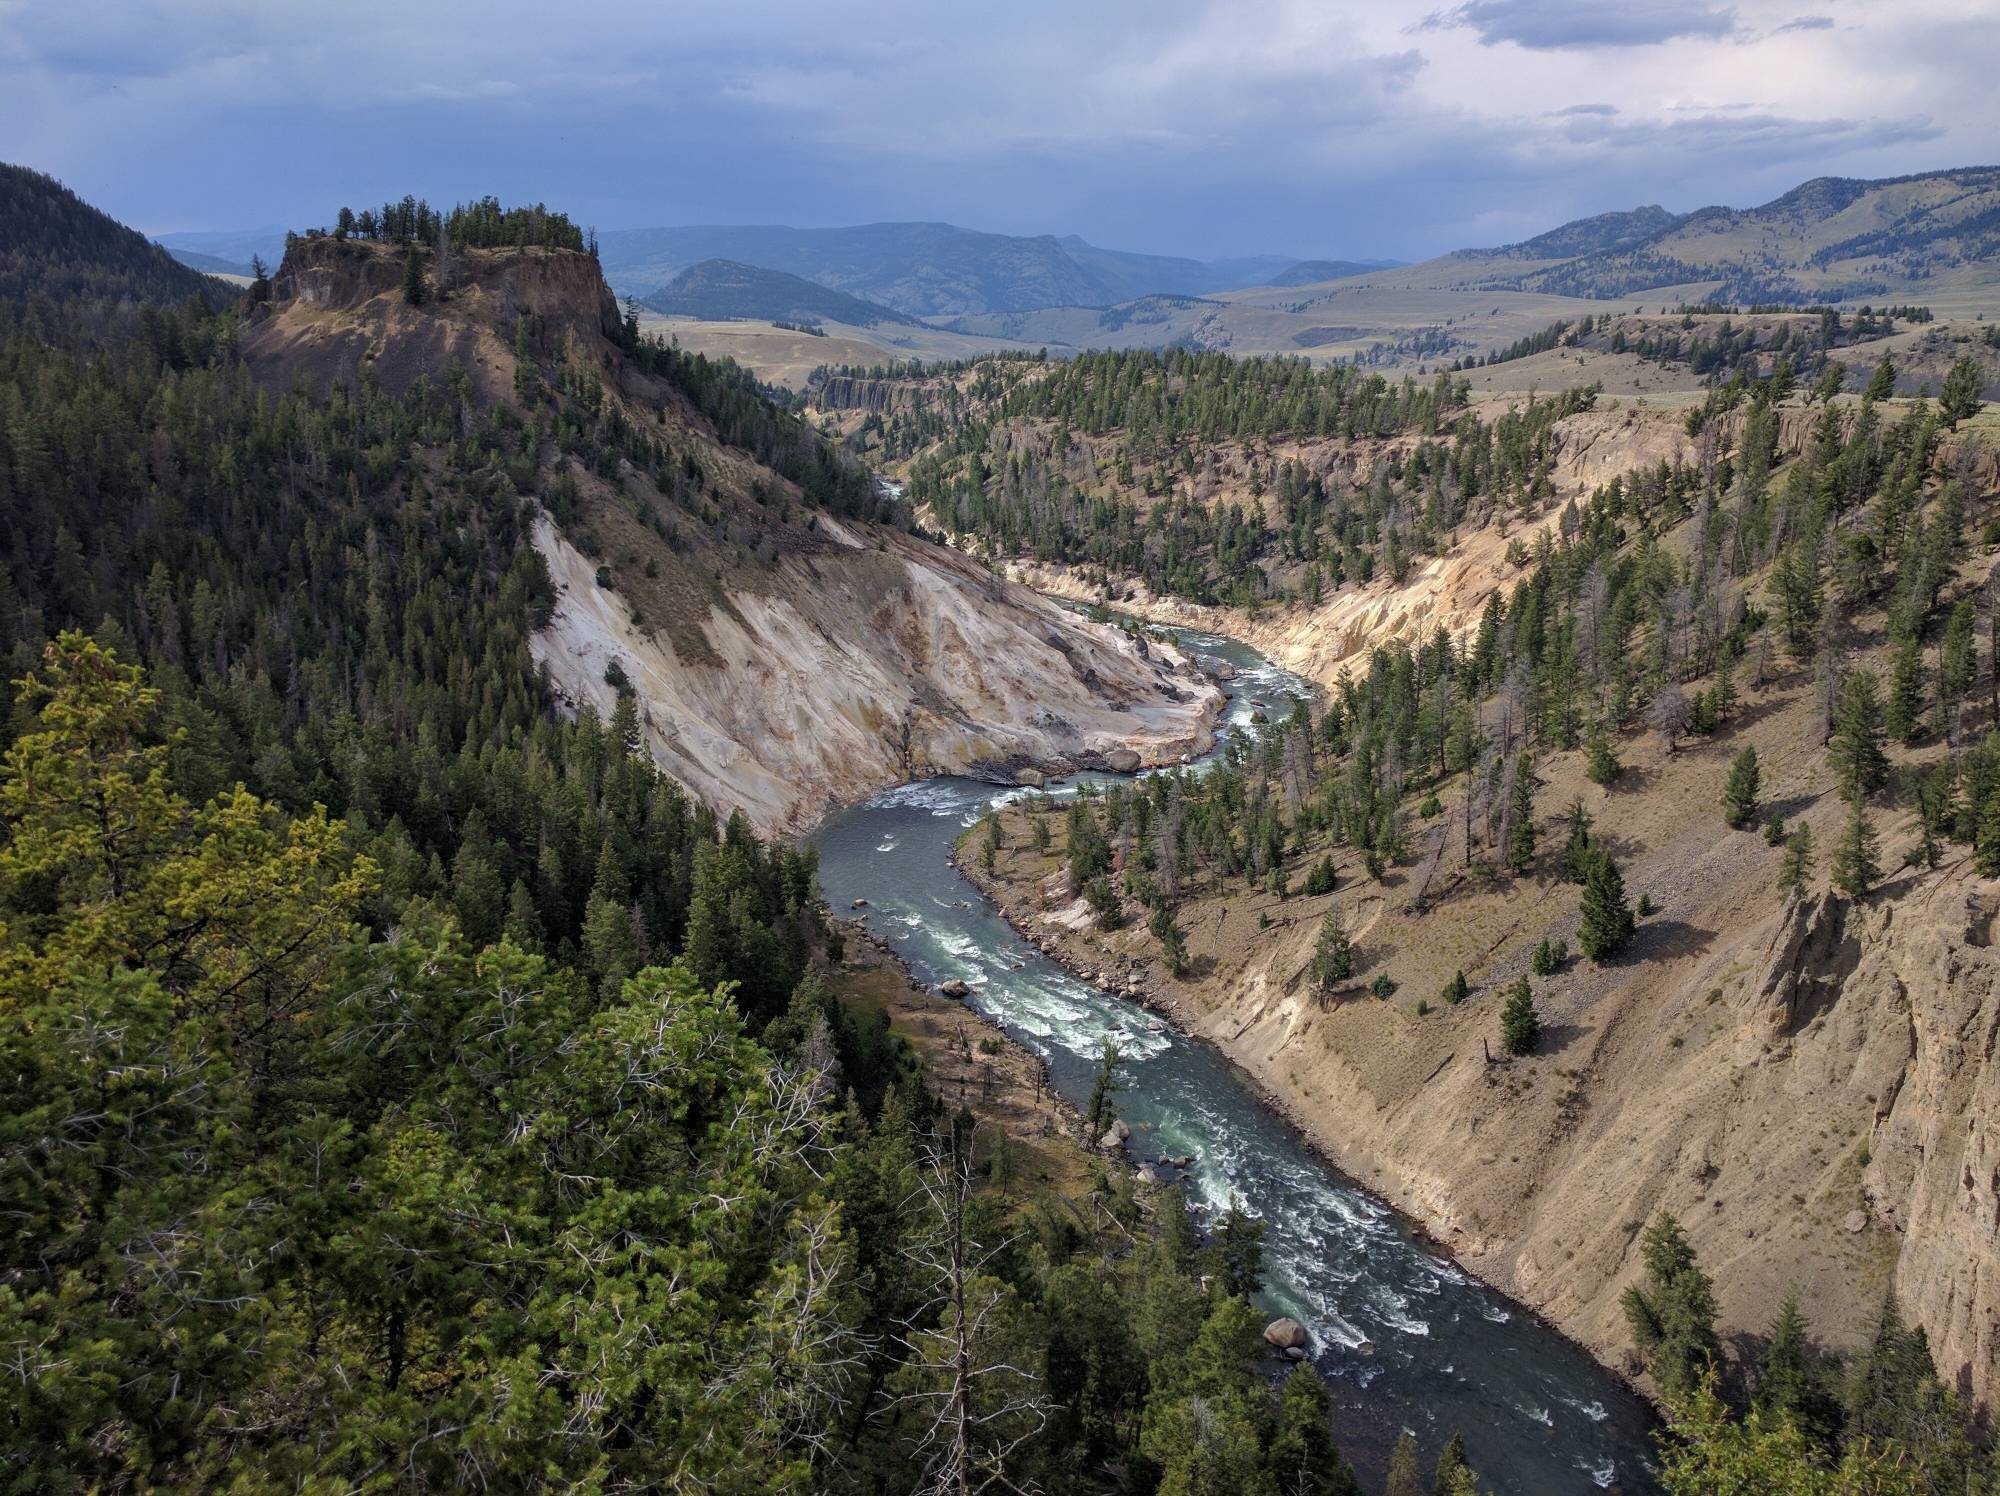 Image: The Yellowstone River as seen from the Calcite Springs overlook